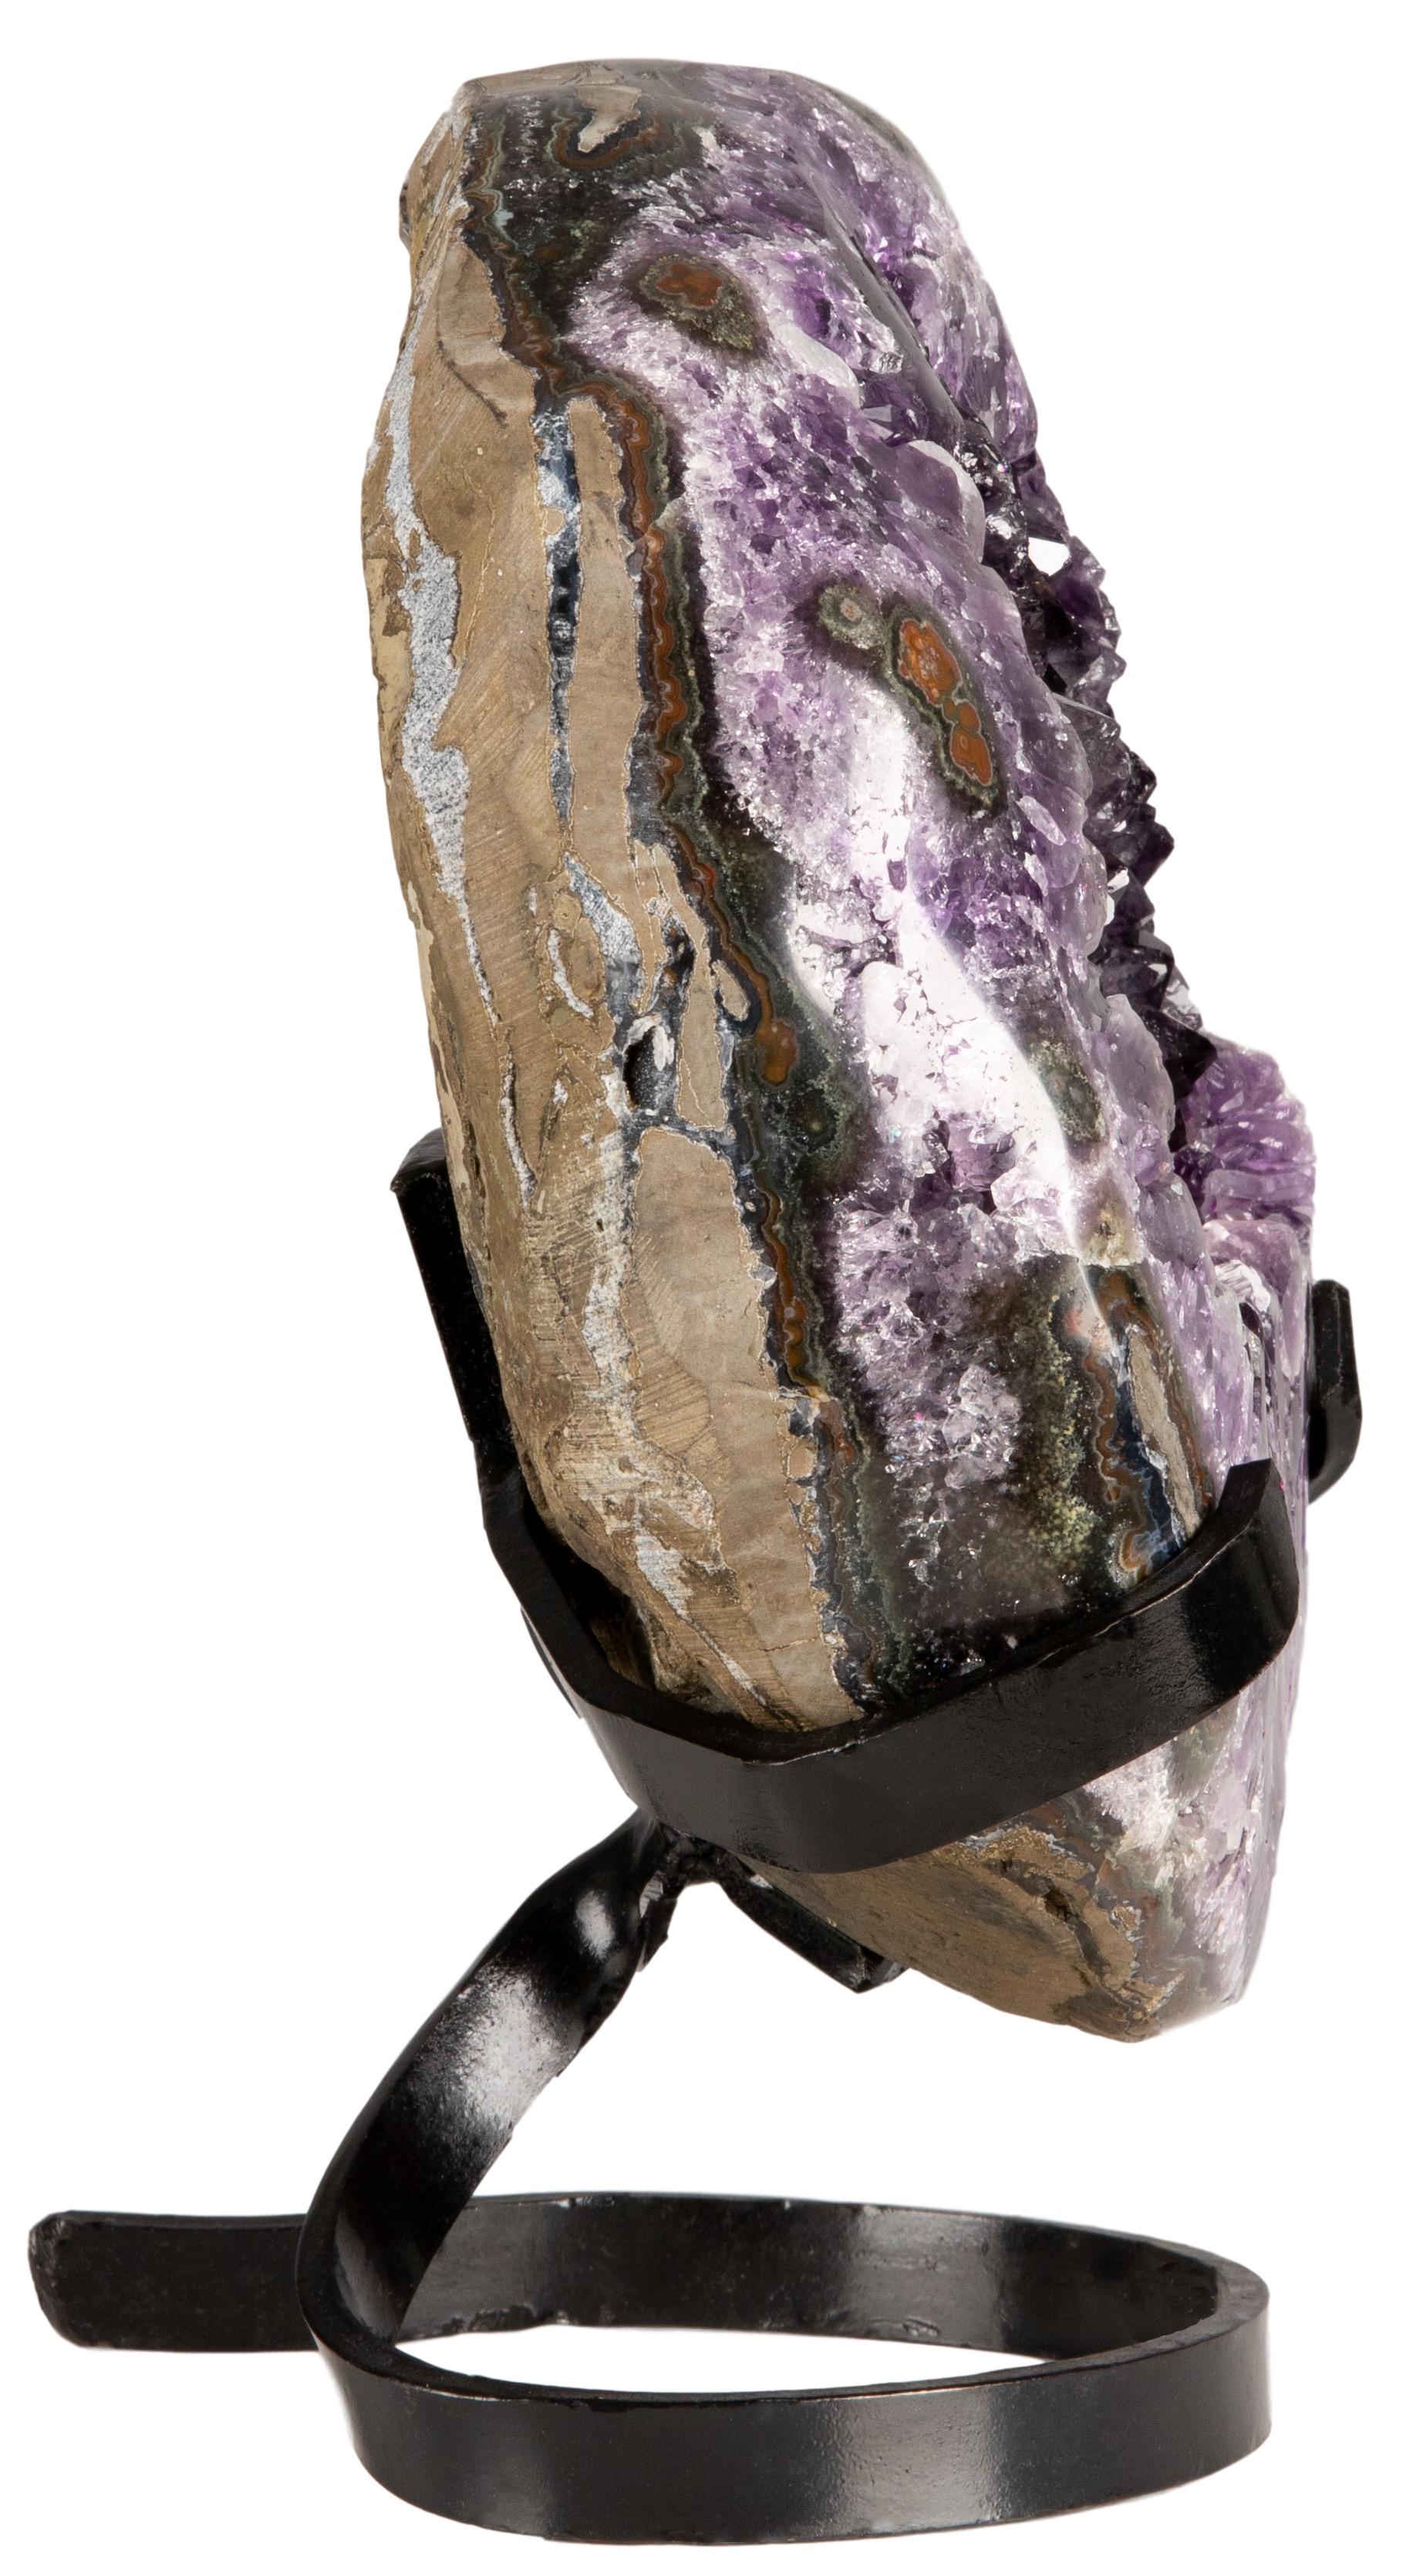 An exquisite cut and polished partial amethyst geode with a circular shape. The front of the piece presents beautiful, vibrant, deep purple color amethyst with high peaked crystals. A polished stalactite can be observed in the lower portion,